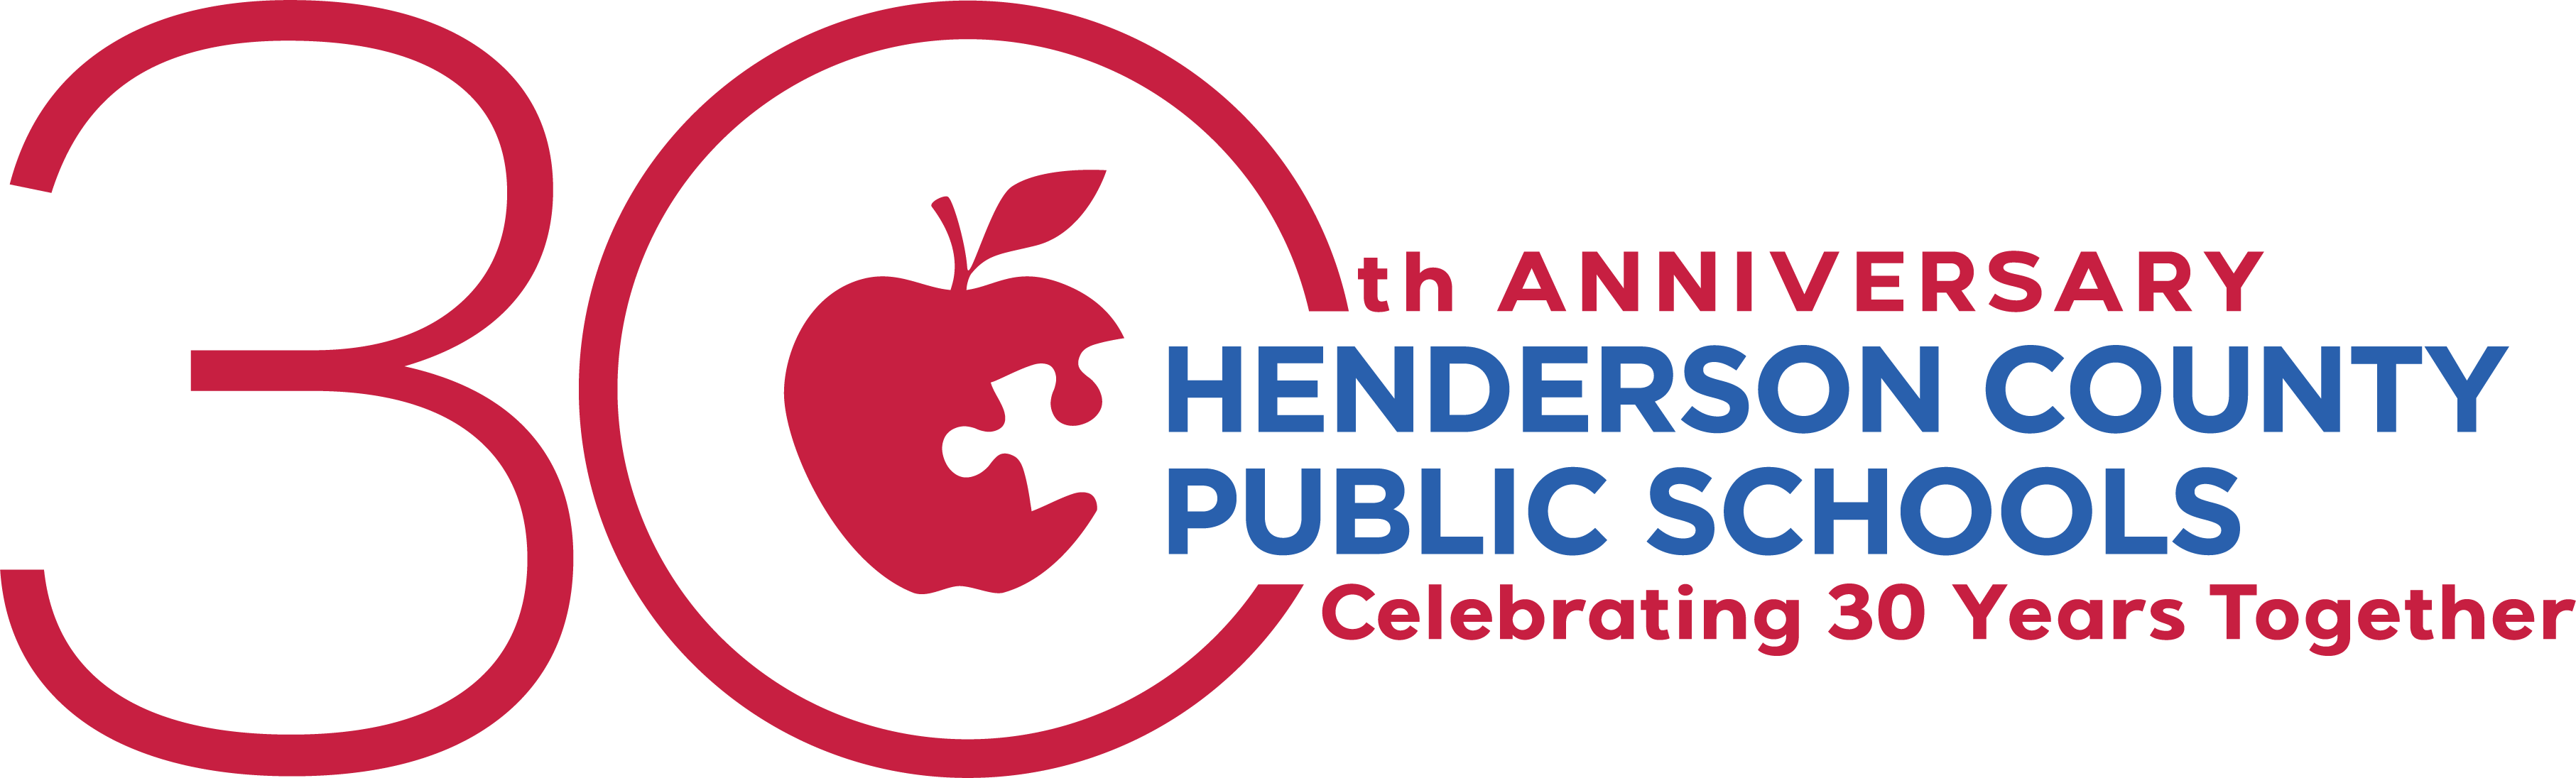 Henderson County Public Schools 30th Anniversary, Celebrating 30 years together.